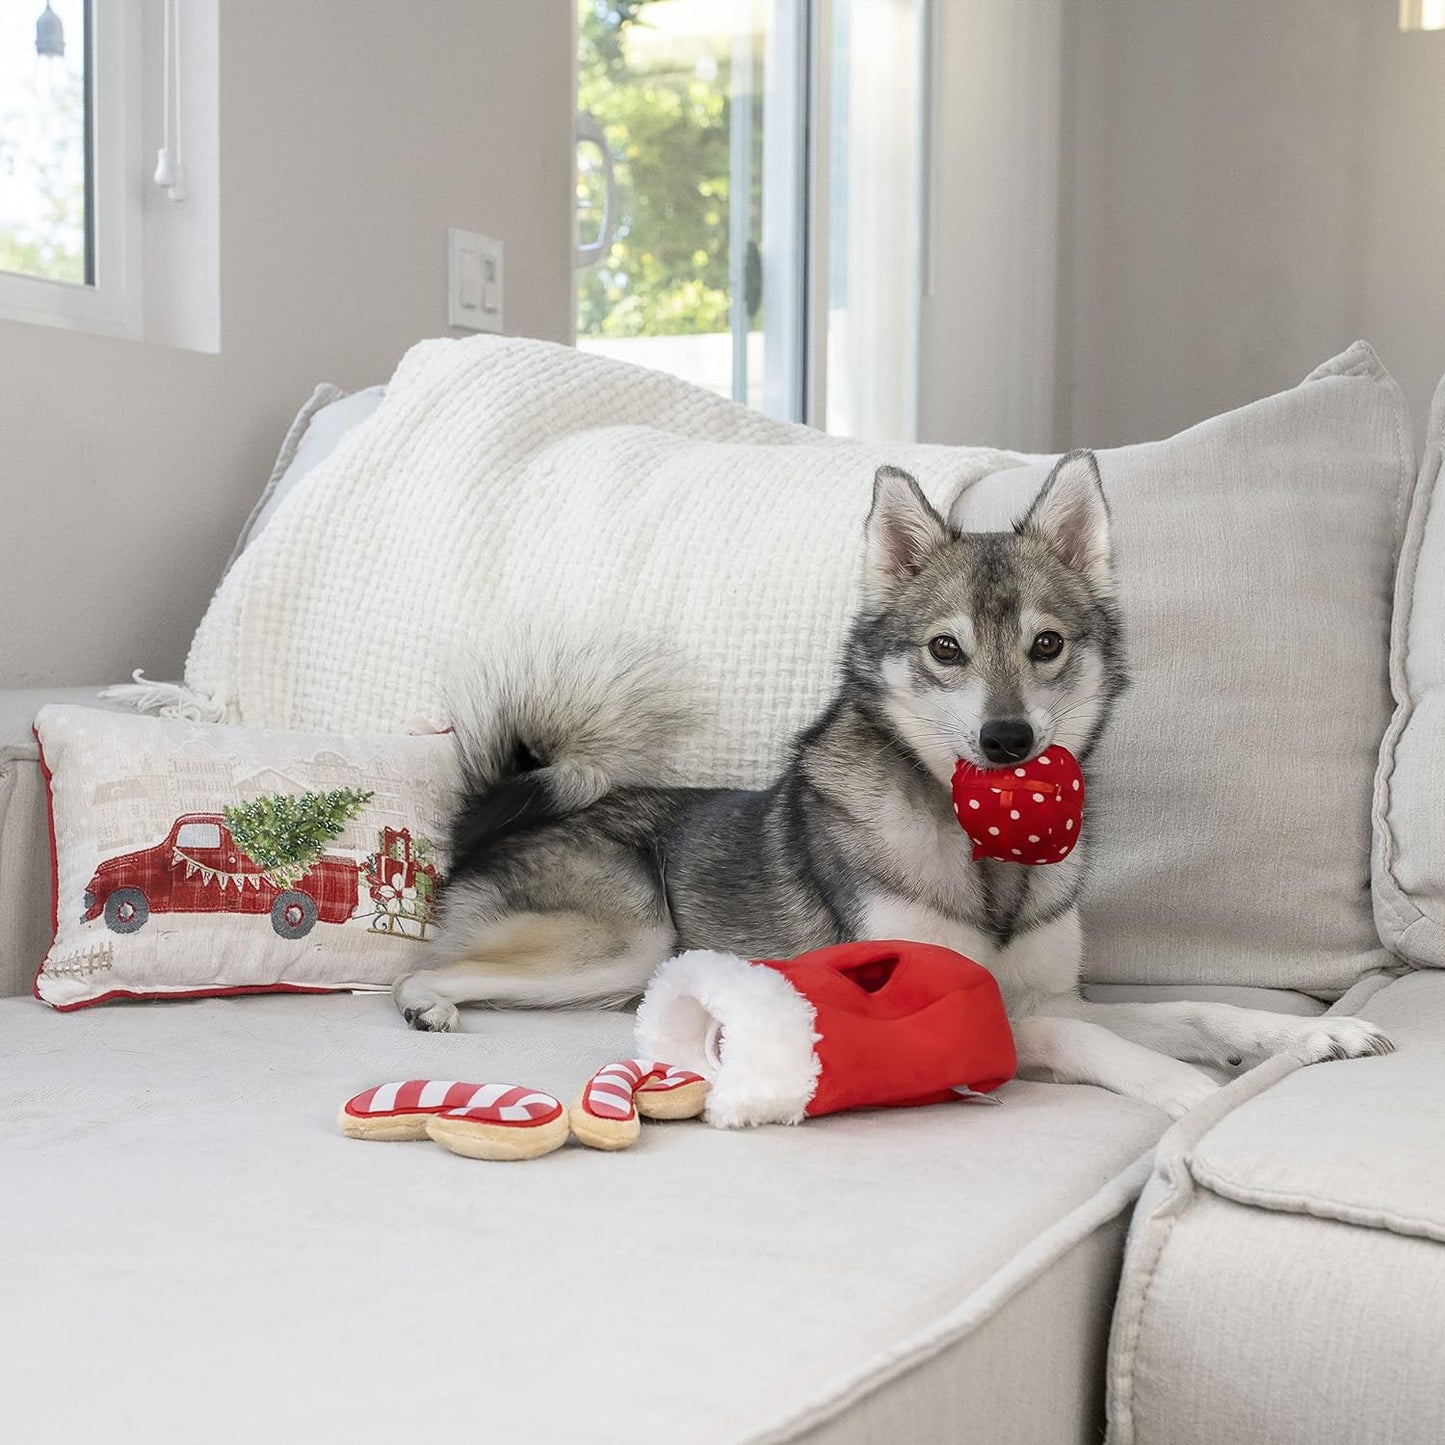 Find a Toy Christmas Stocking Dog Toy